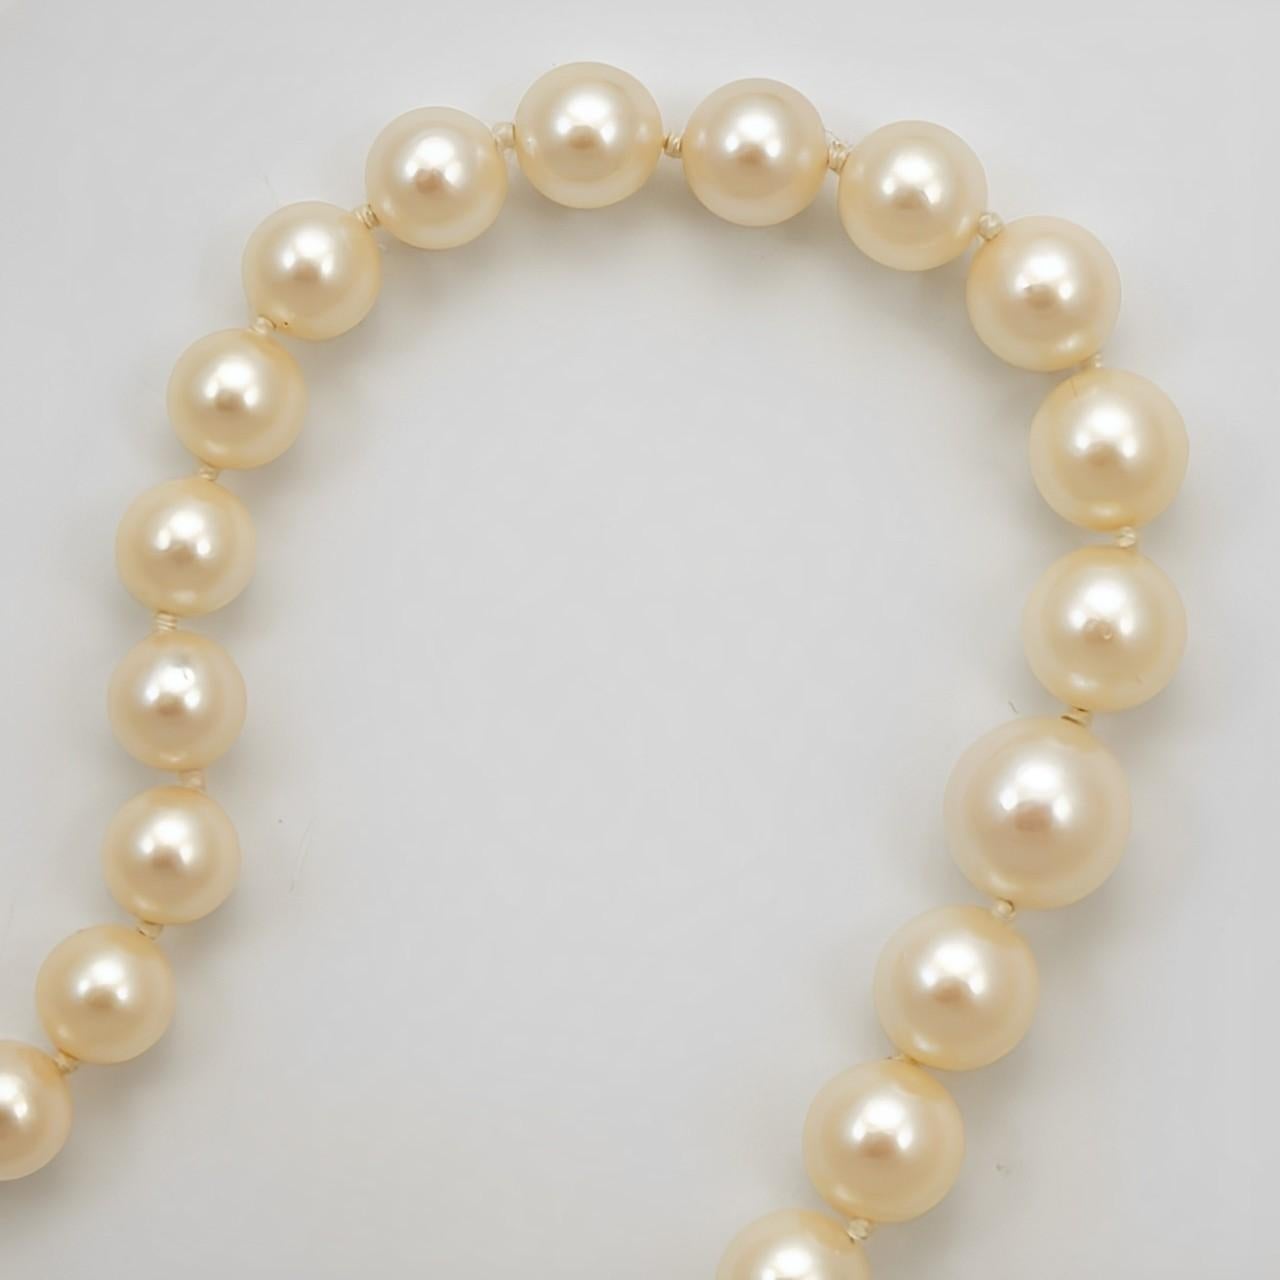 Round Cut Graduated Cream Cultured Pearl Necklace with 9K Gold and Cultured Pearl Clasp For Sale